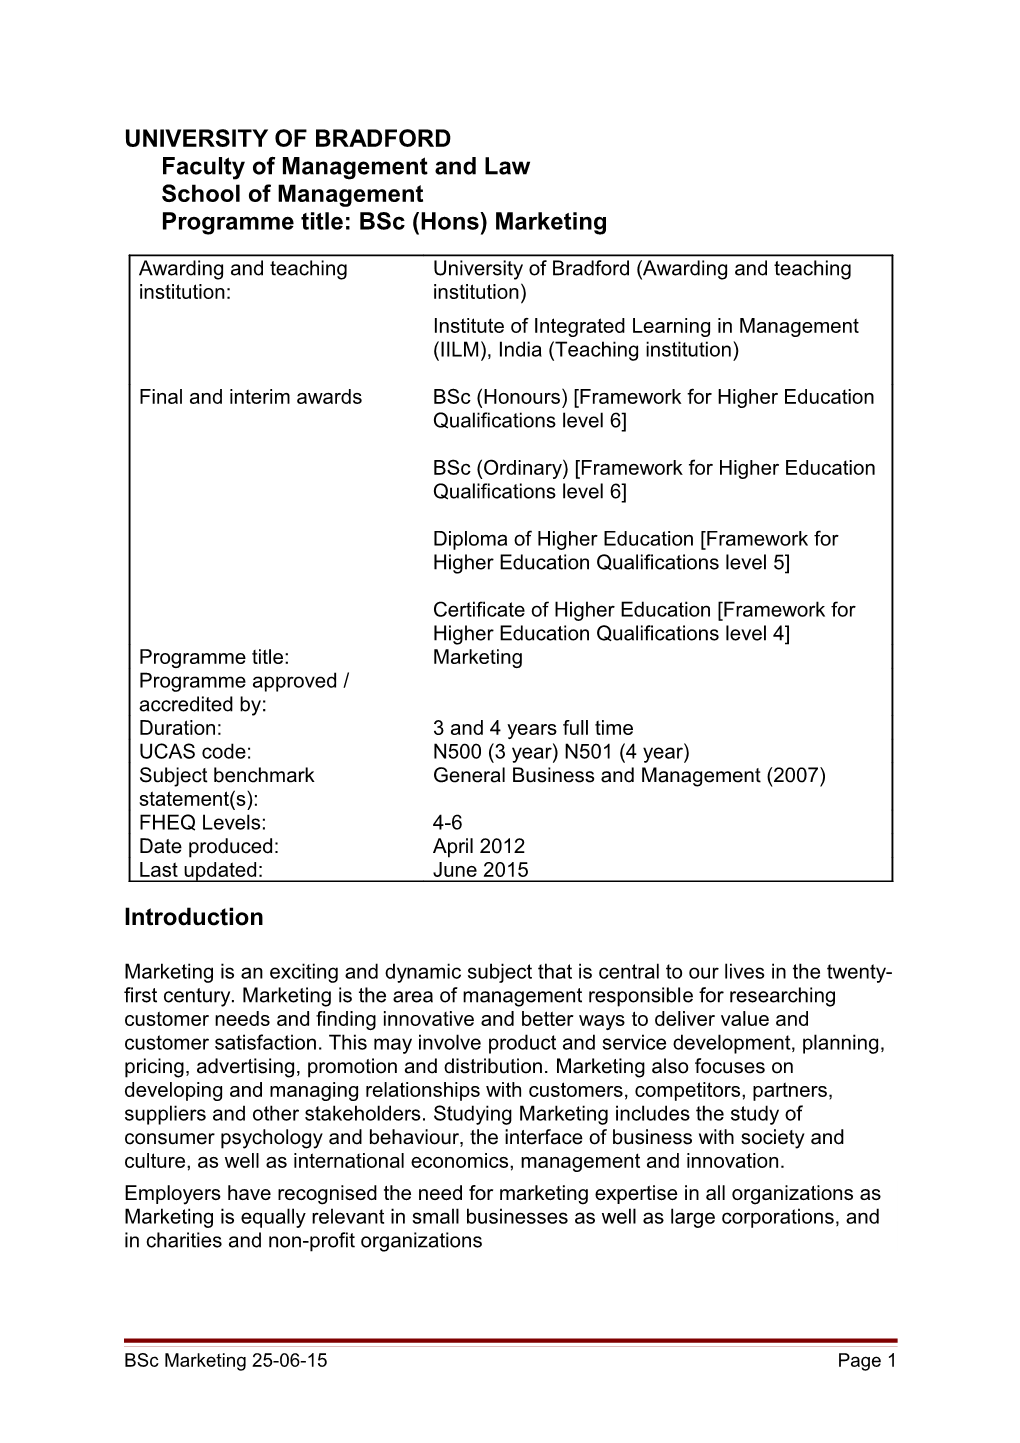 UNIVERSITY of Bradfordfaculty of Management and Lawschool of Managementprogramme Title